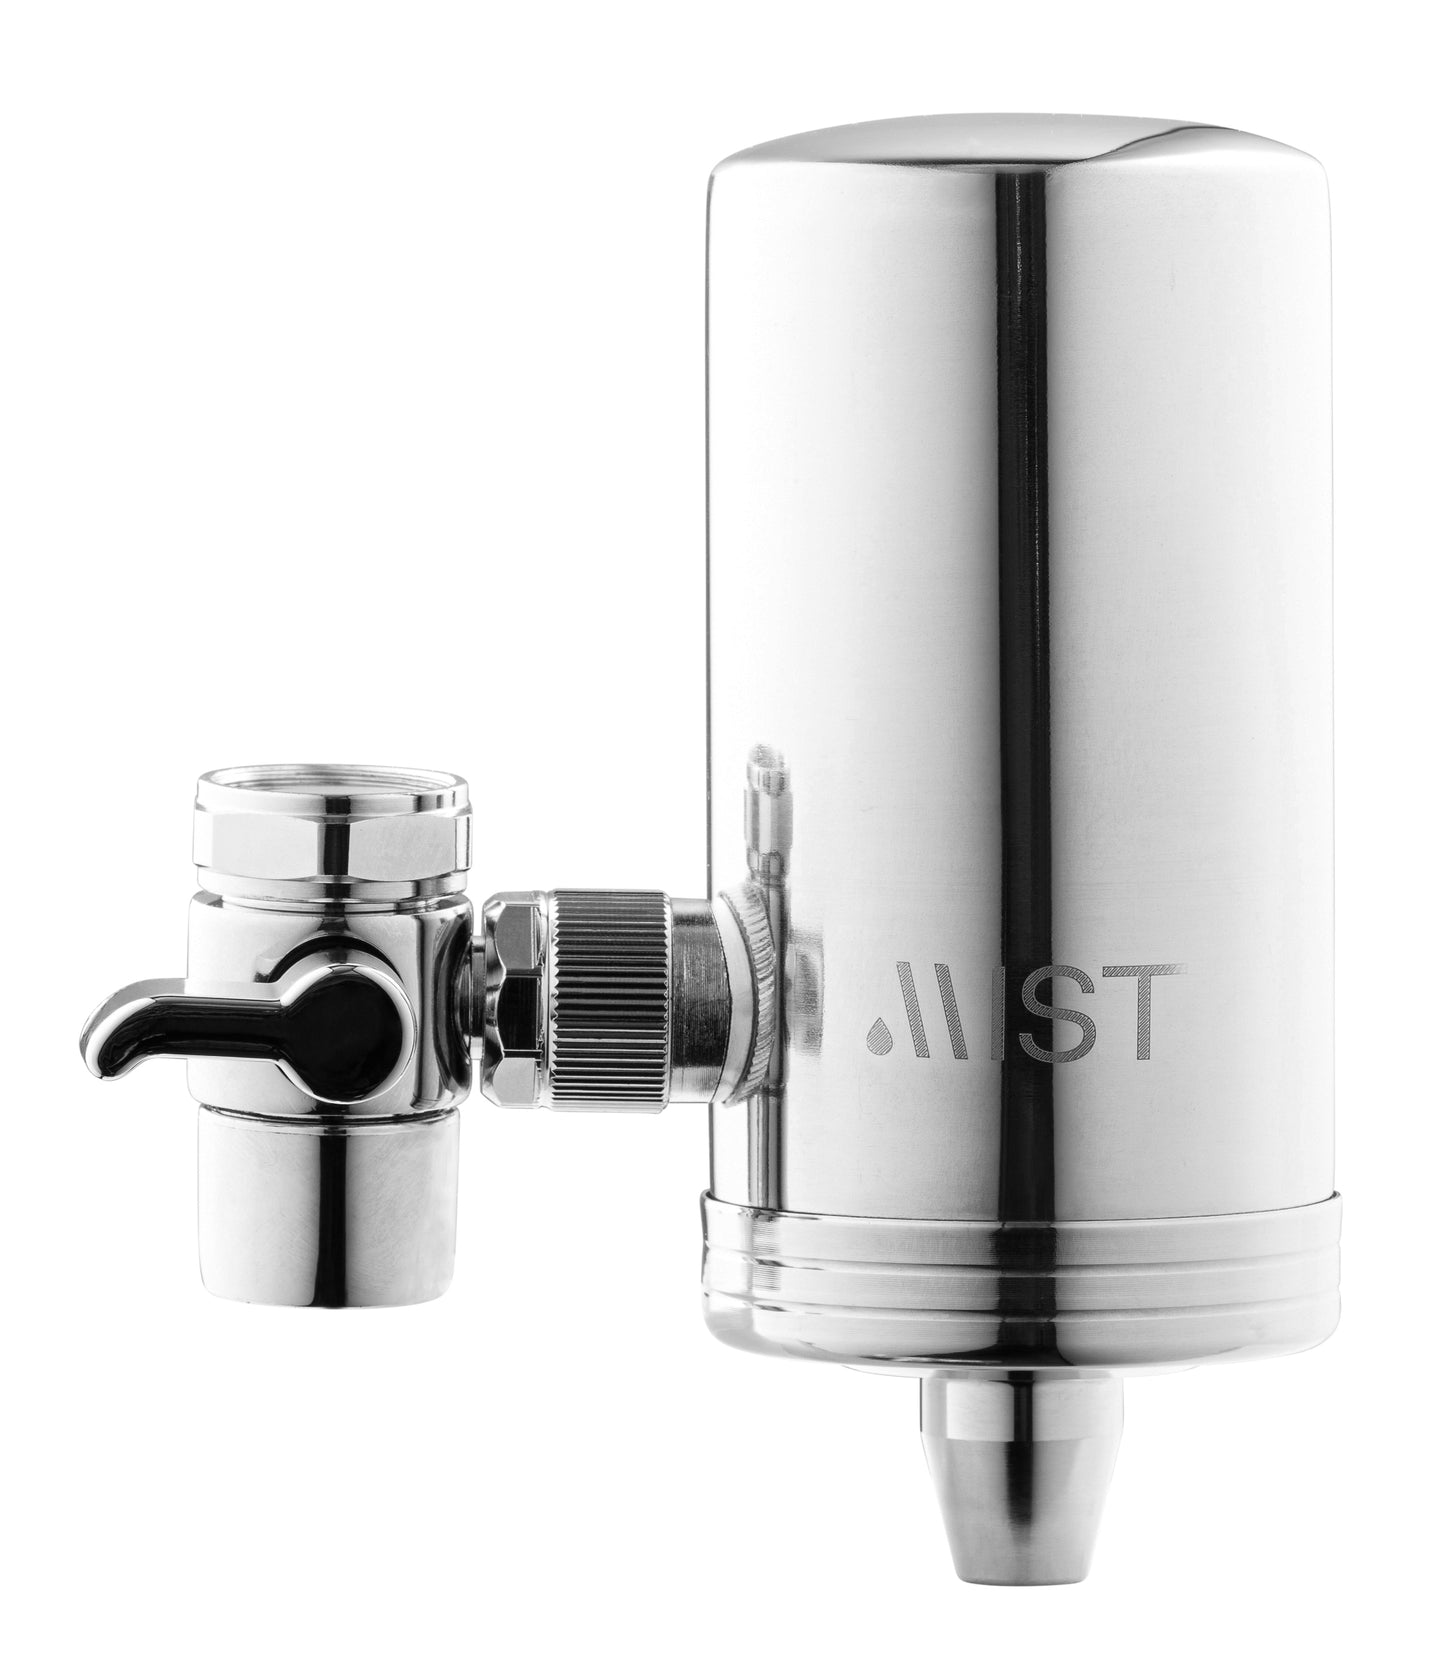 Stainless Steel Activated Carbon Fiber Faucet Filtration System, Water Filter Cartridge, 320 Gal. Capacity